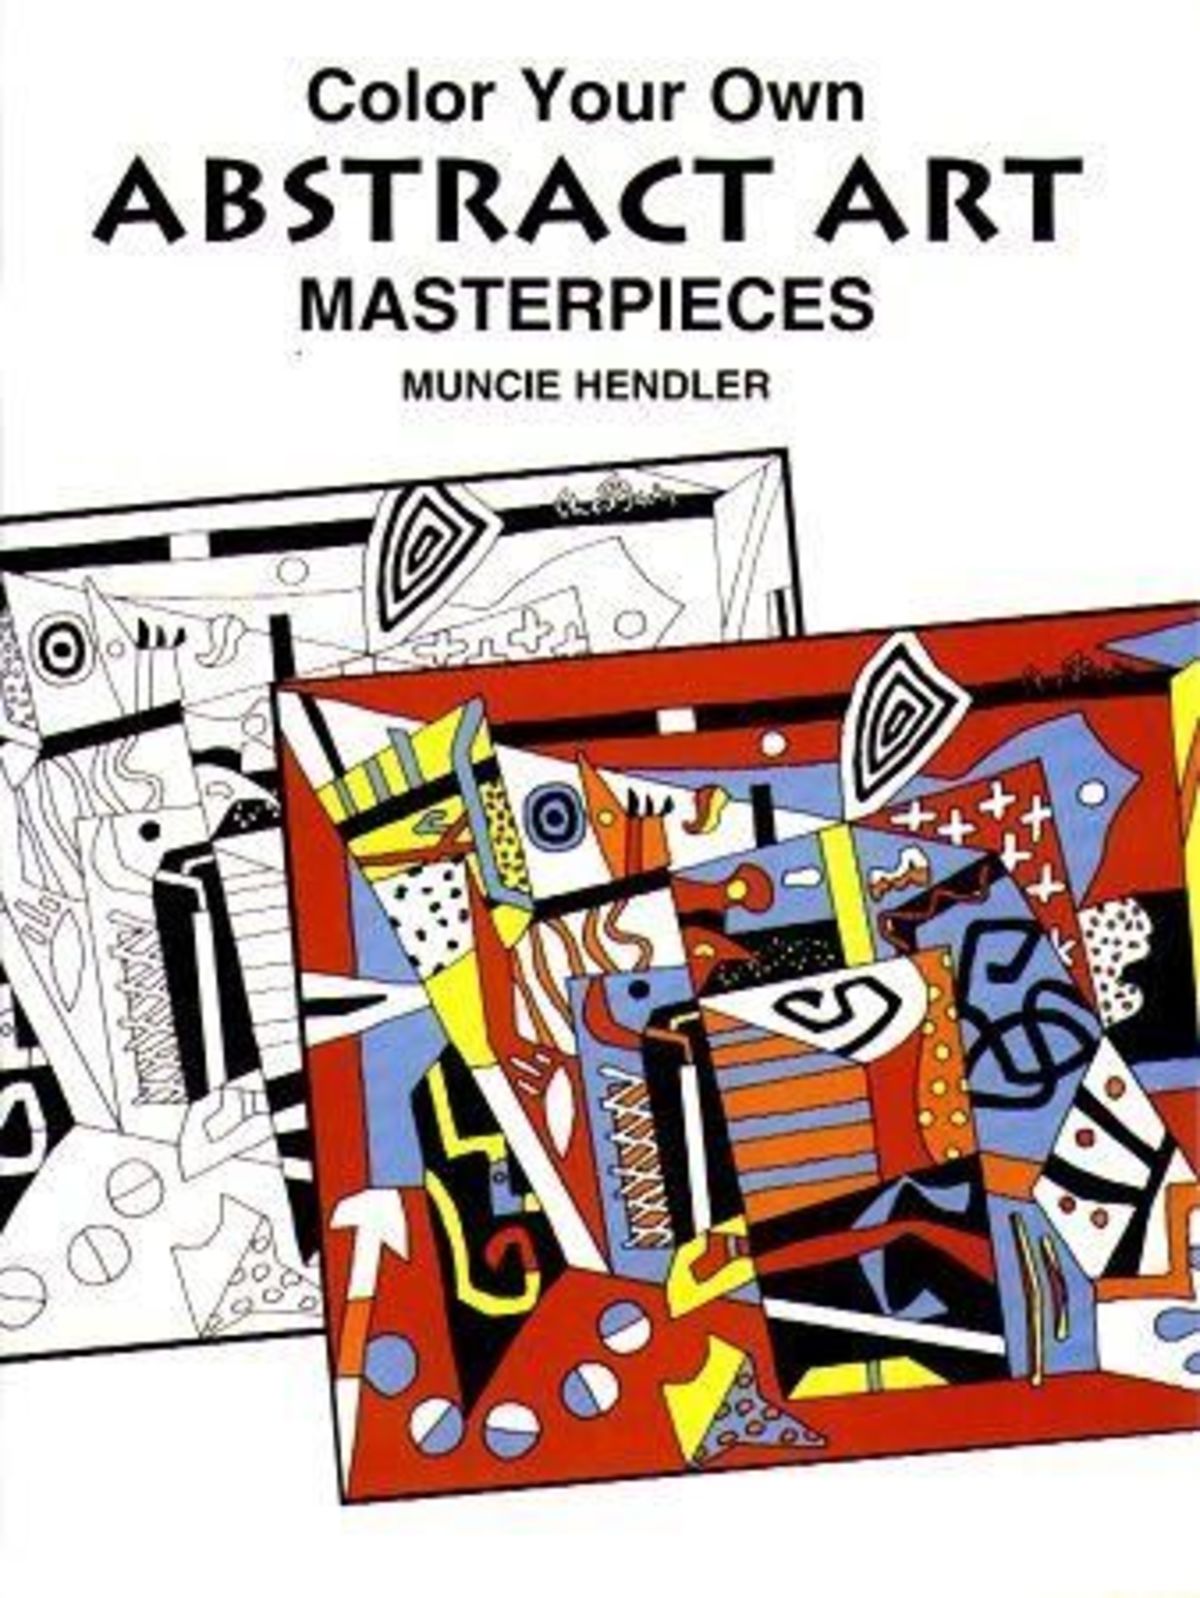 Color Your Own Abstract Art Masterpieces Color Your Own Abstract Art Masterpieces